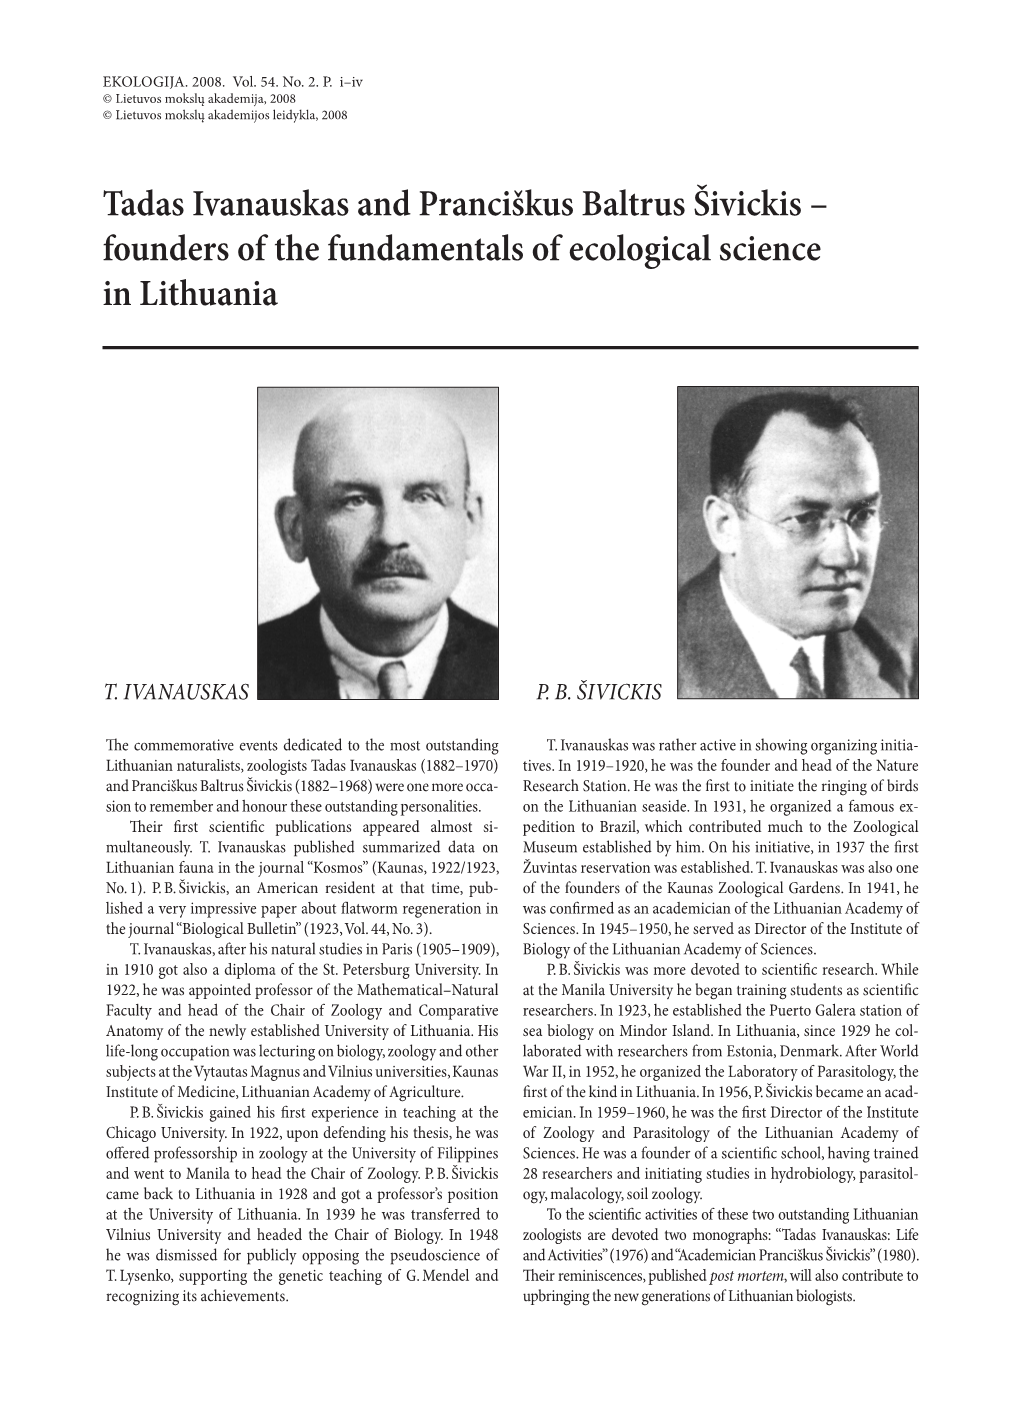 Tadas Ivanauskas and Pranciškus Baltrus Šivickis – Founders of the Fundamentals of Ecological Science in Lithuania